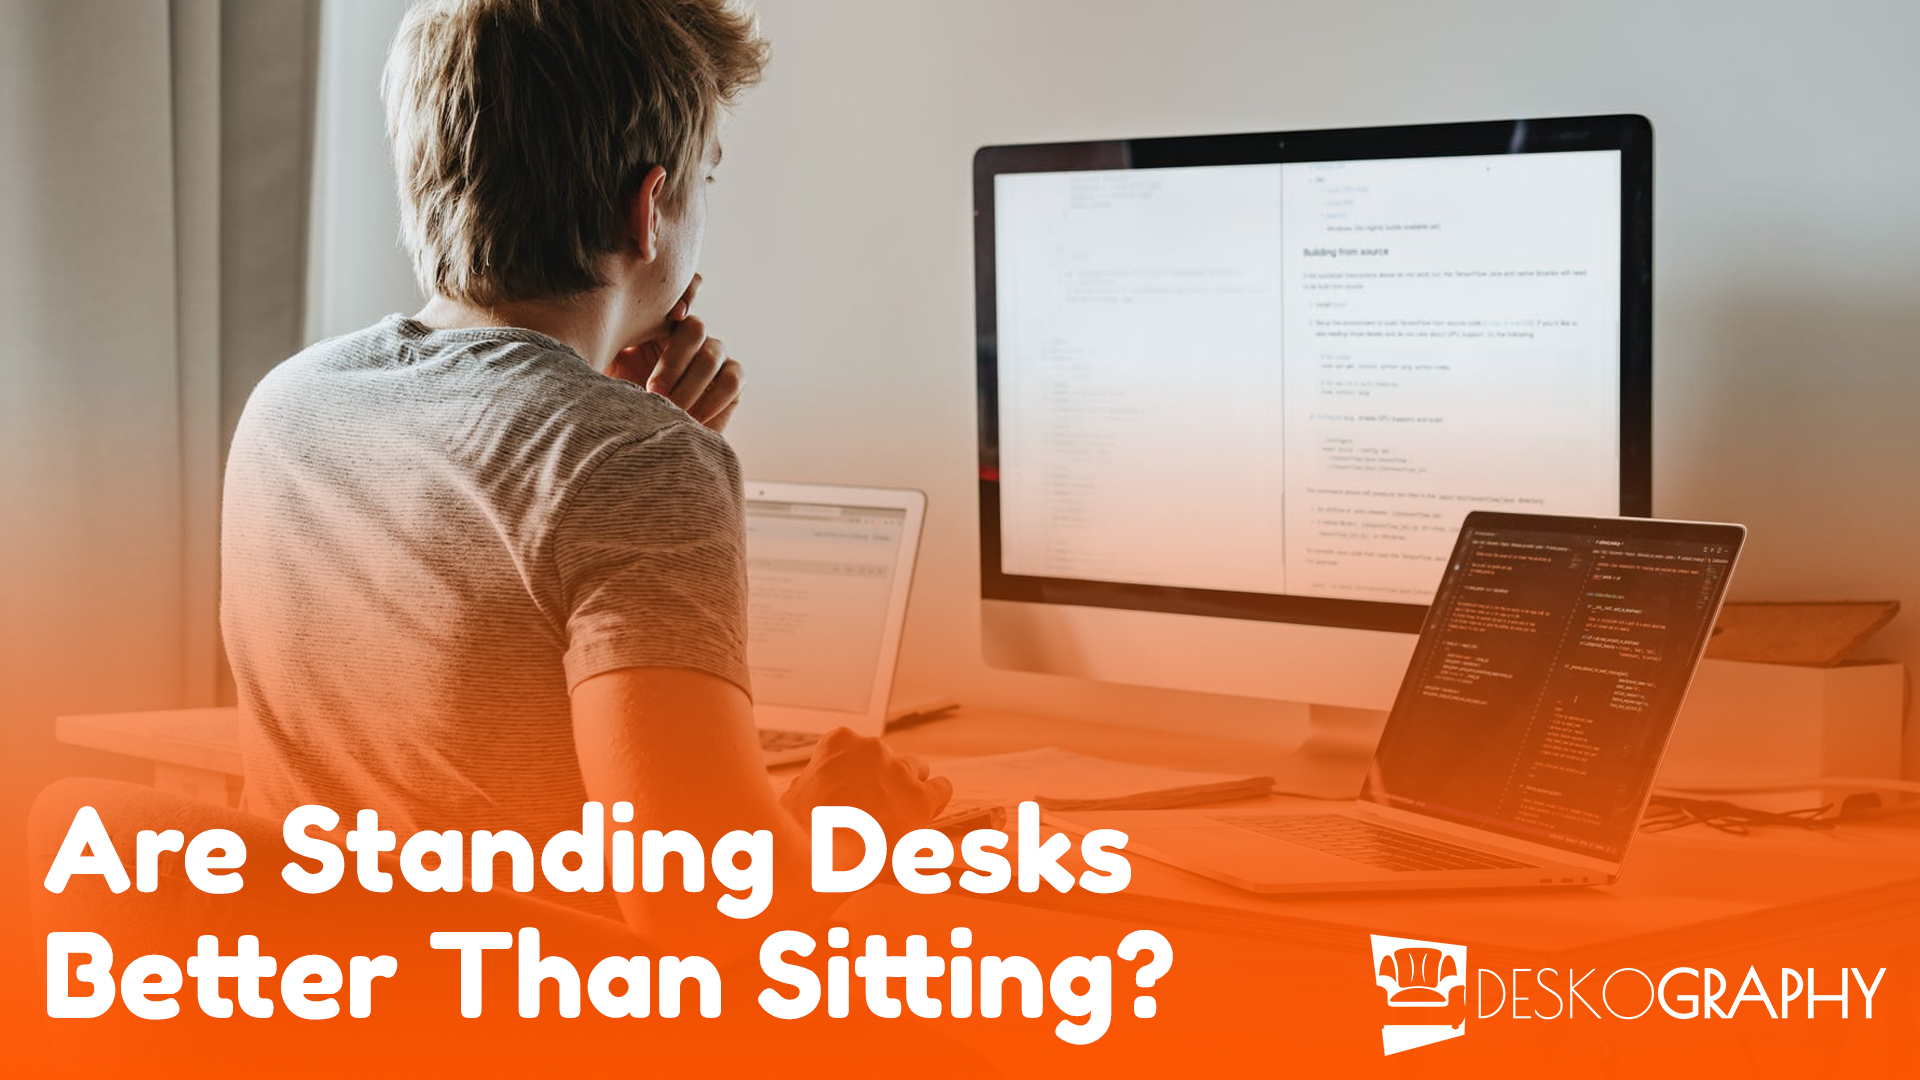 Are standing desks better than sitting